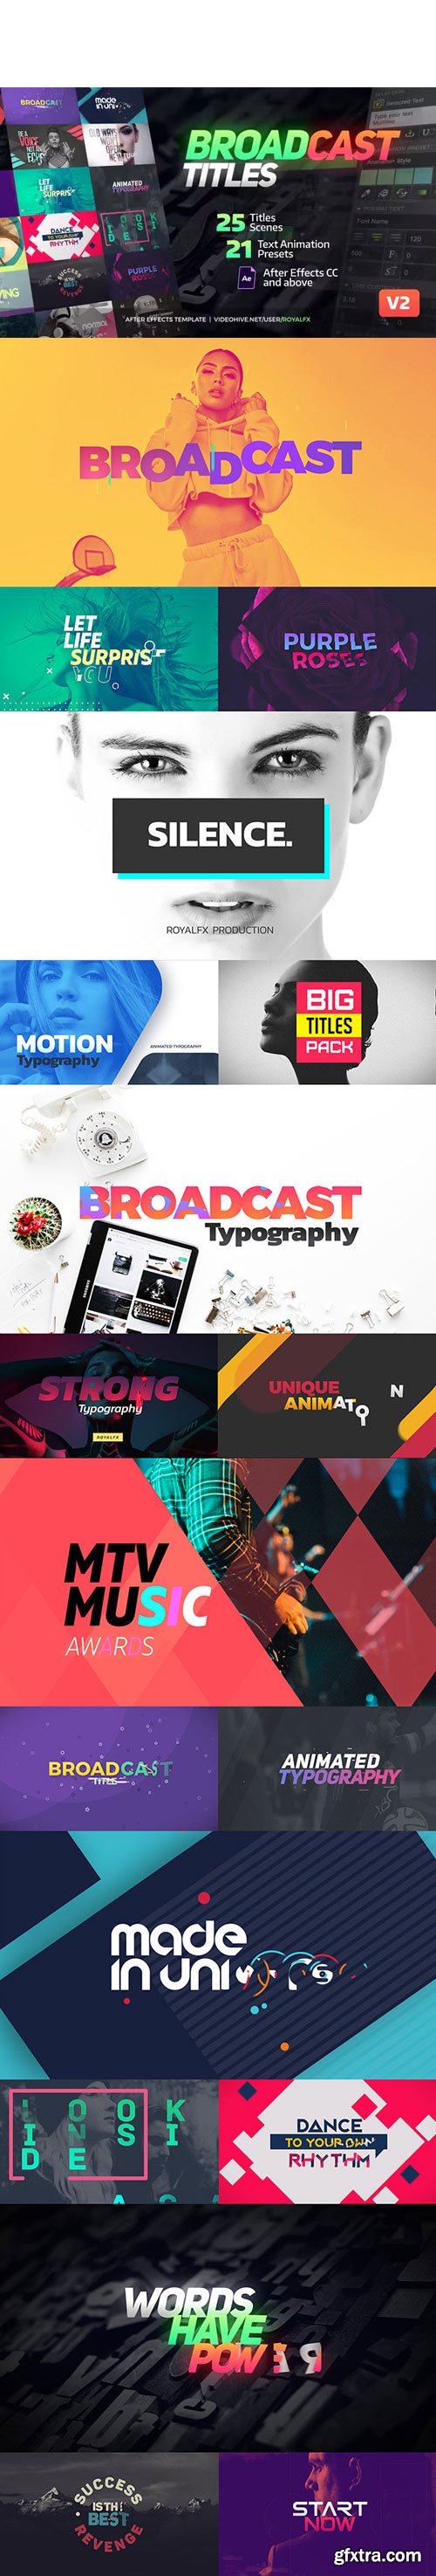 Videohive - TypeX - Broadcast Pack: Title Animation Presets Library V5.1 - 20233979